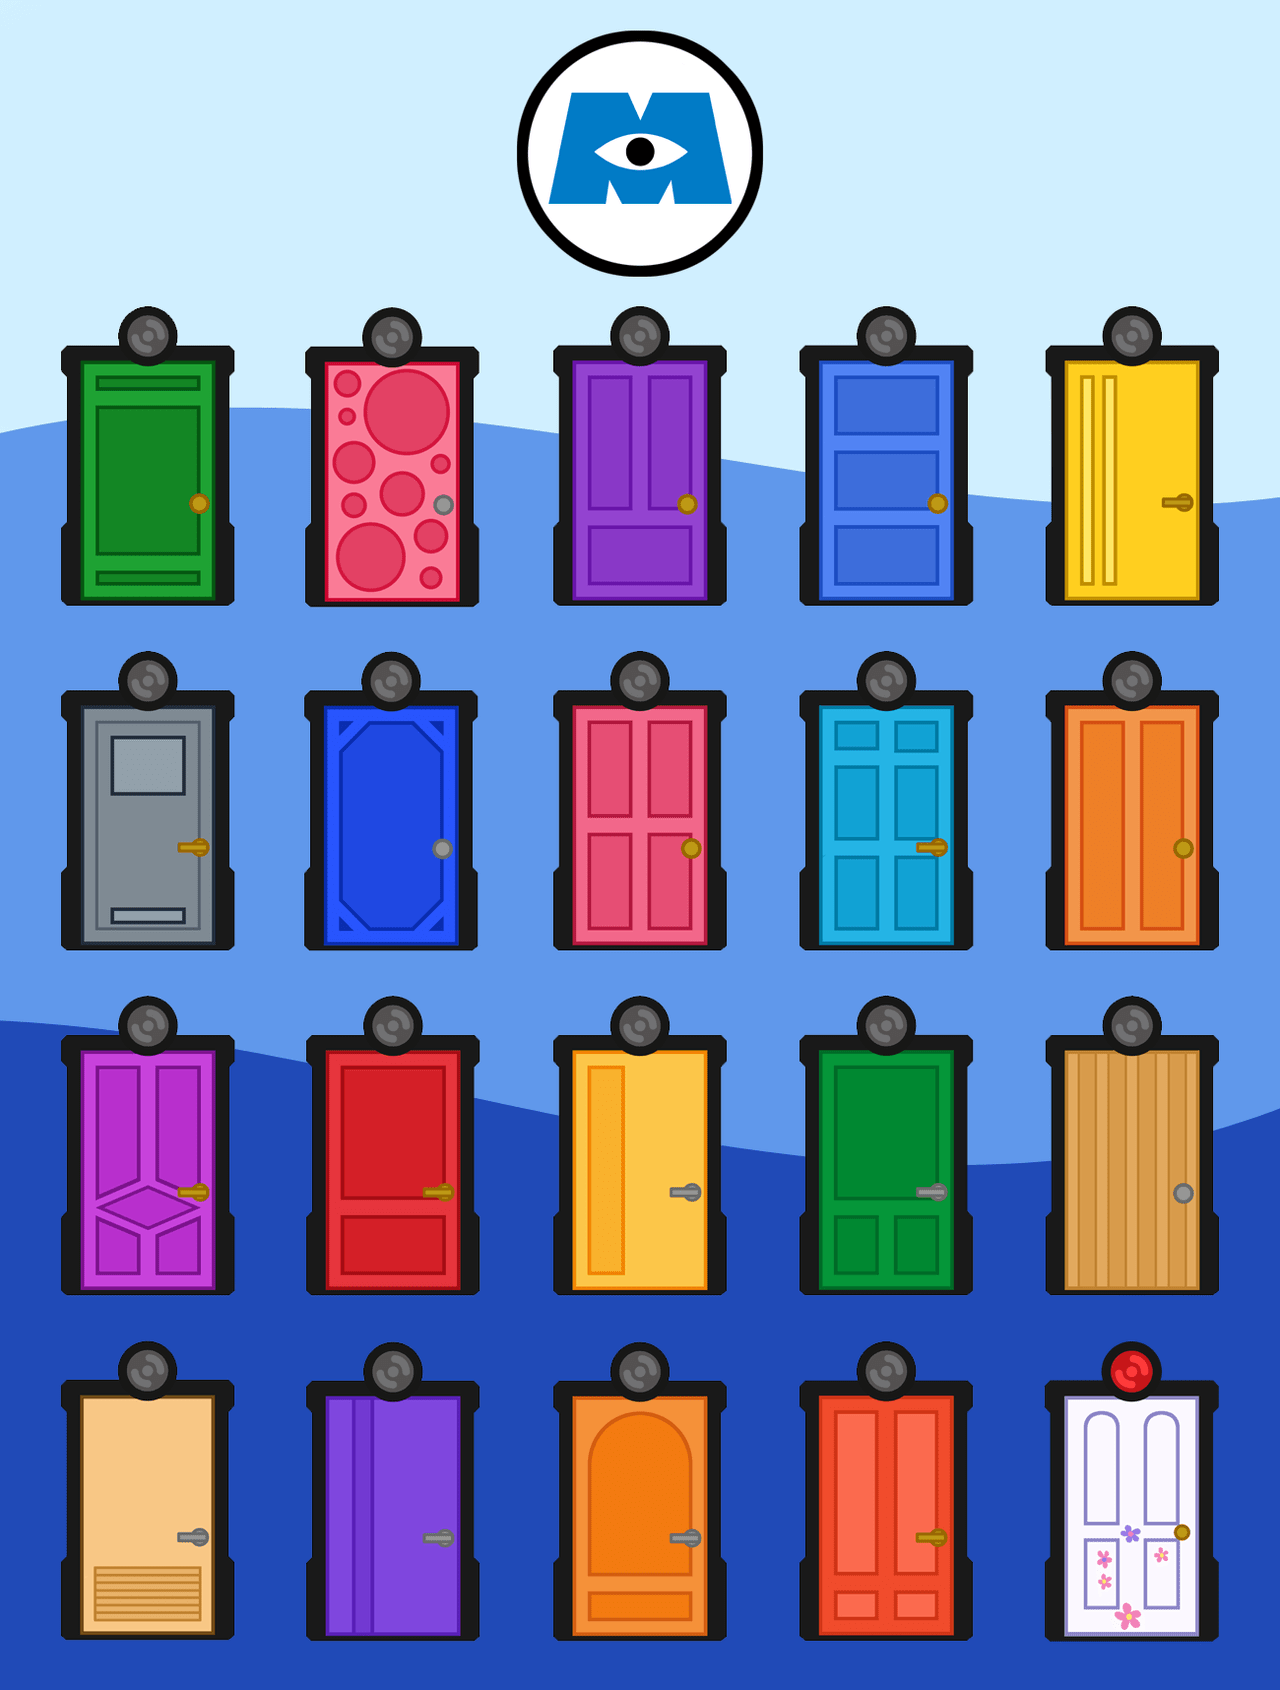 Monsters INC Doors By Caritho On DeviantART Monsters Inc Doors Monsters Inc Monster Inc Party